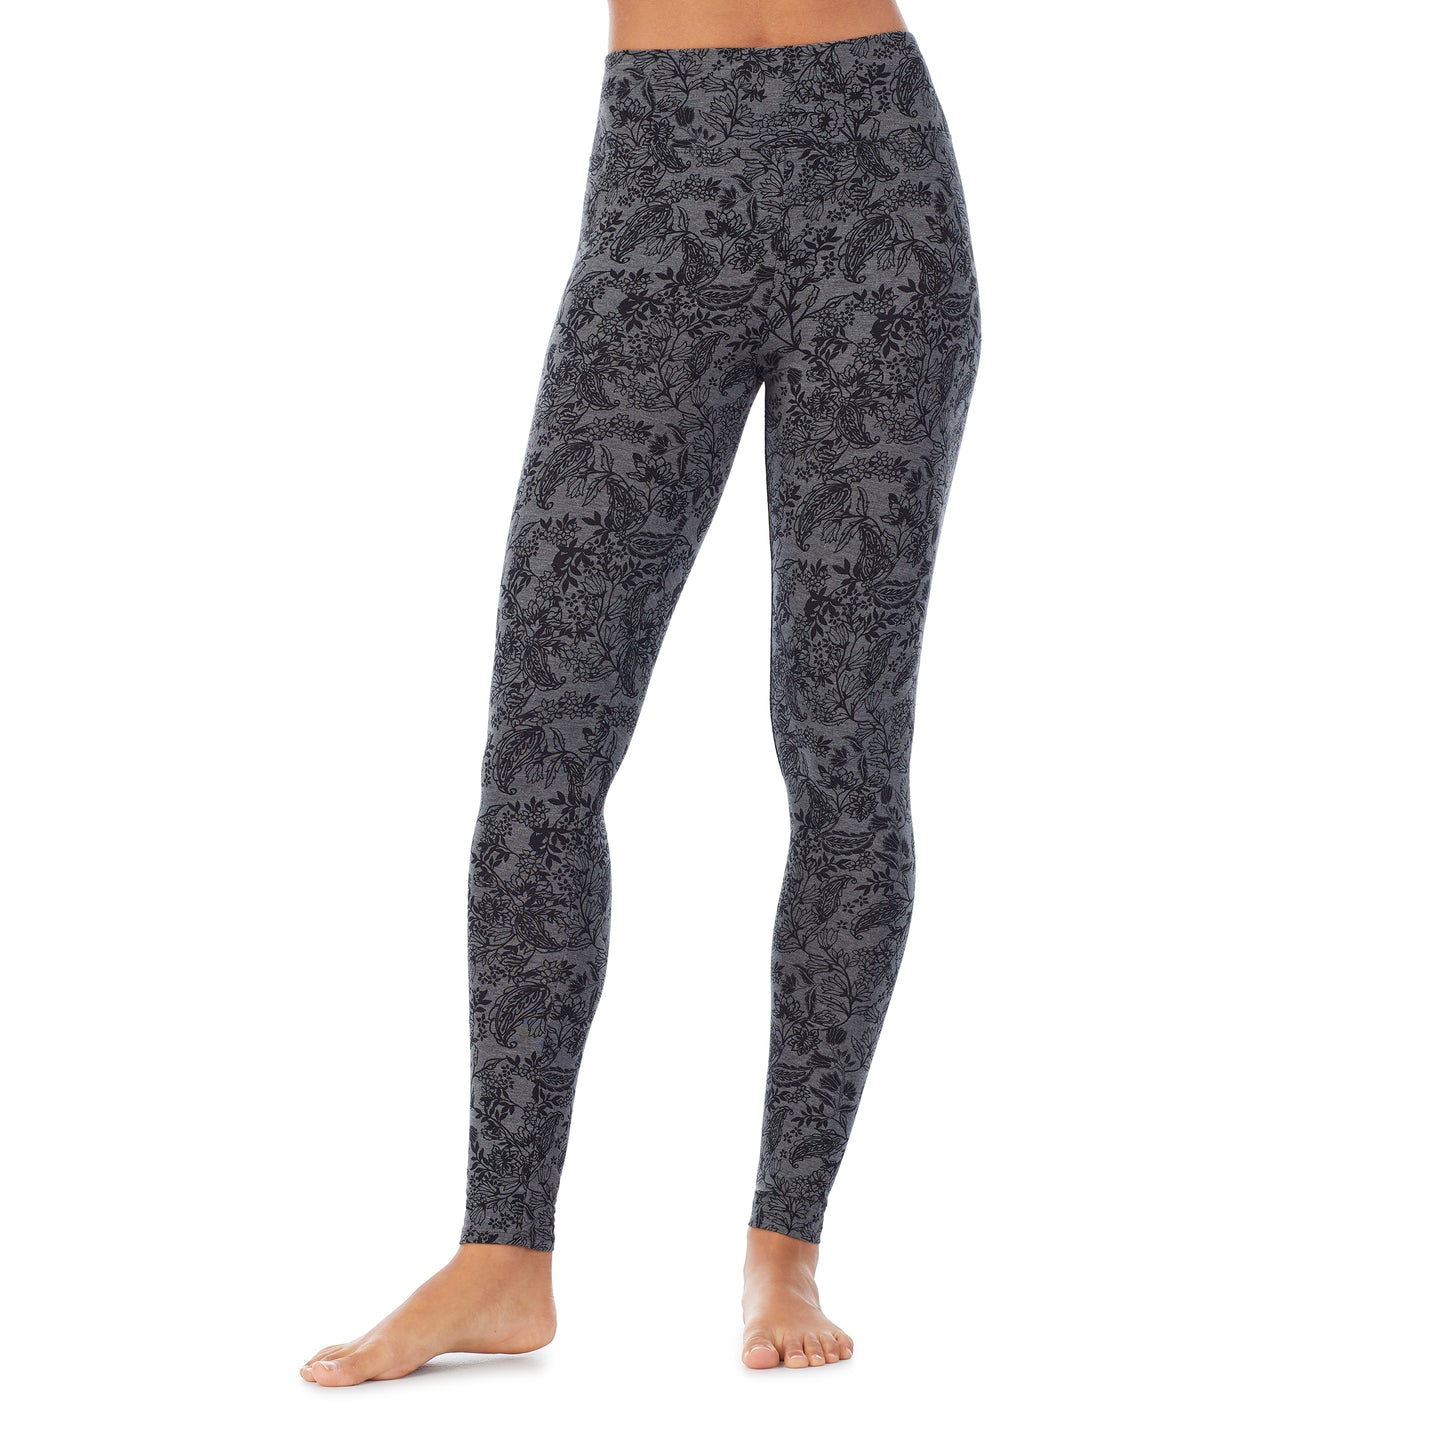 Heather Grey Paisley; Model is wearing size S. She is 5’9”, Bust 32”, Waist 25.5”, Hips 36”. @A lady wearing a heather grey paisley high waist legging.